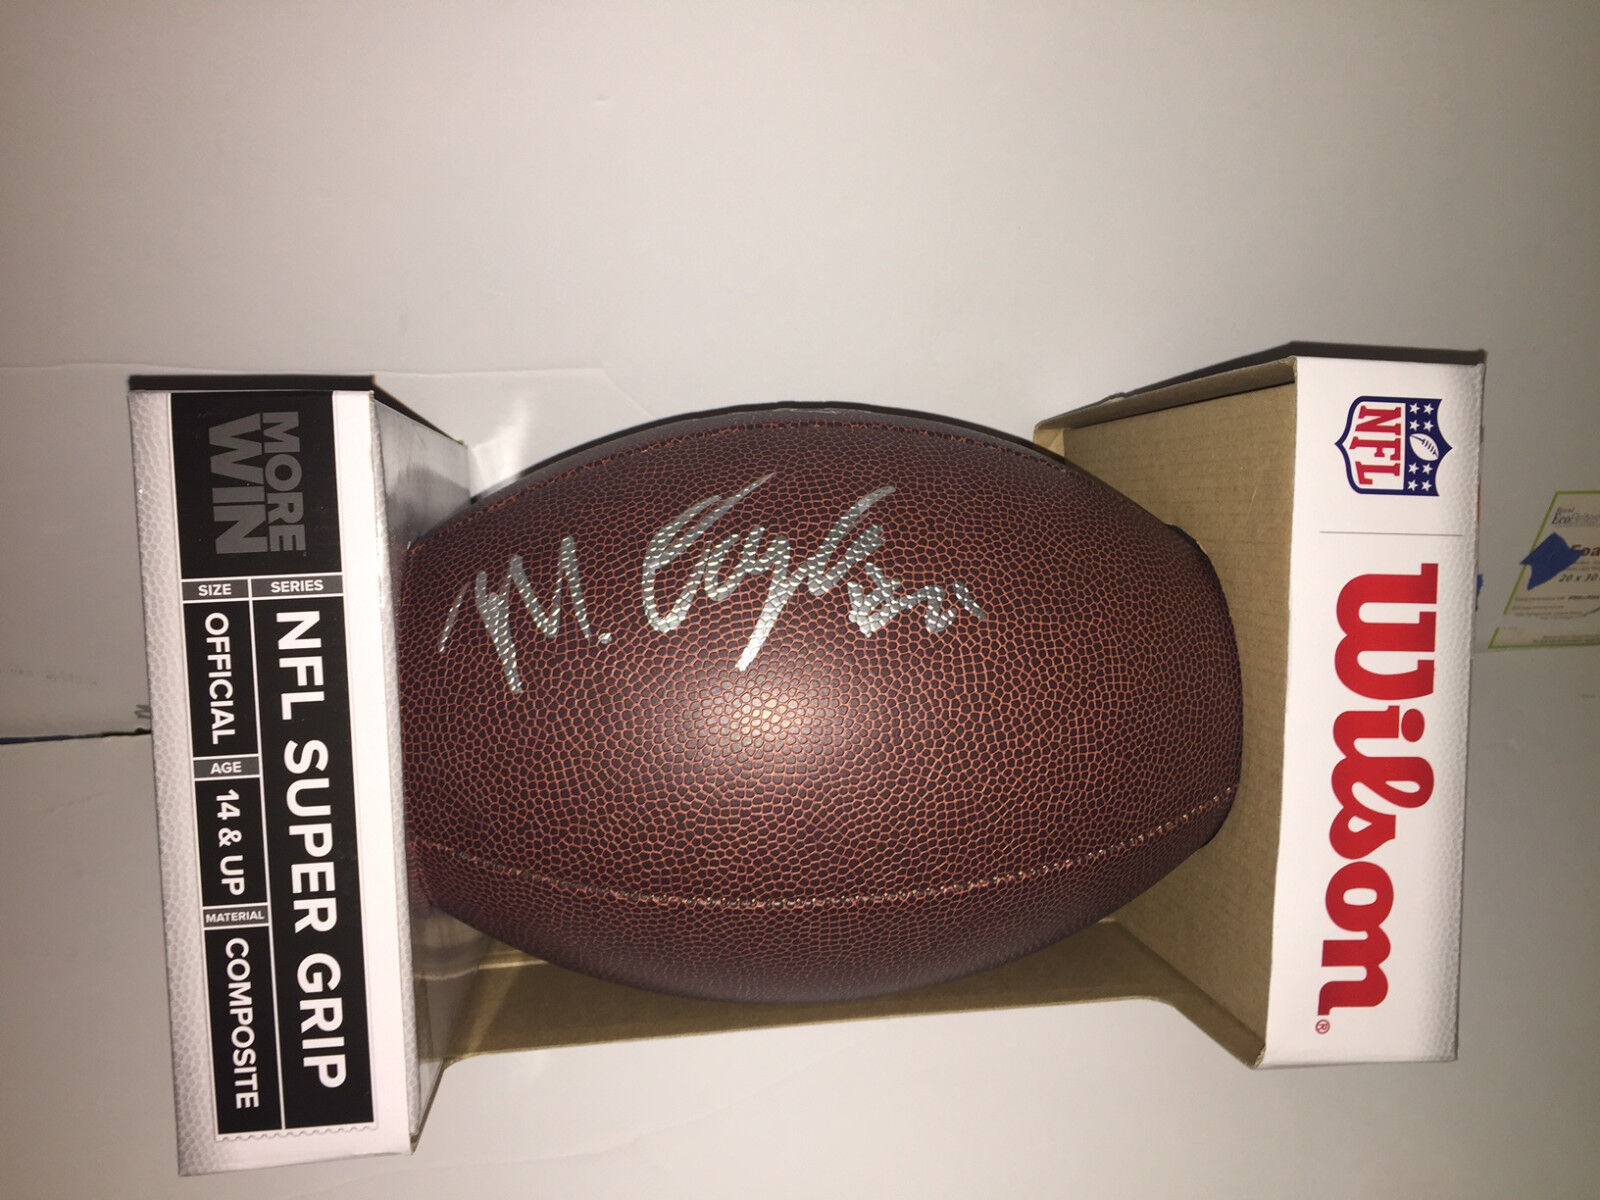 Matt Dayes NC State Wolfpack hand signed autographed NFL Football N.C. b